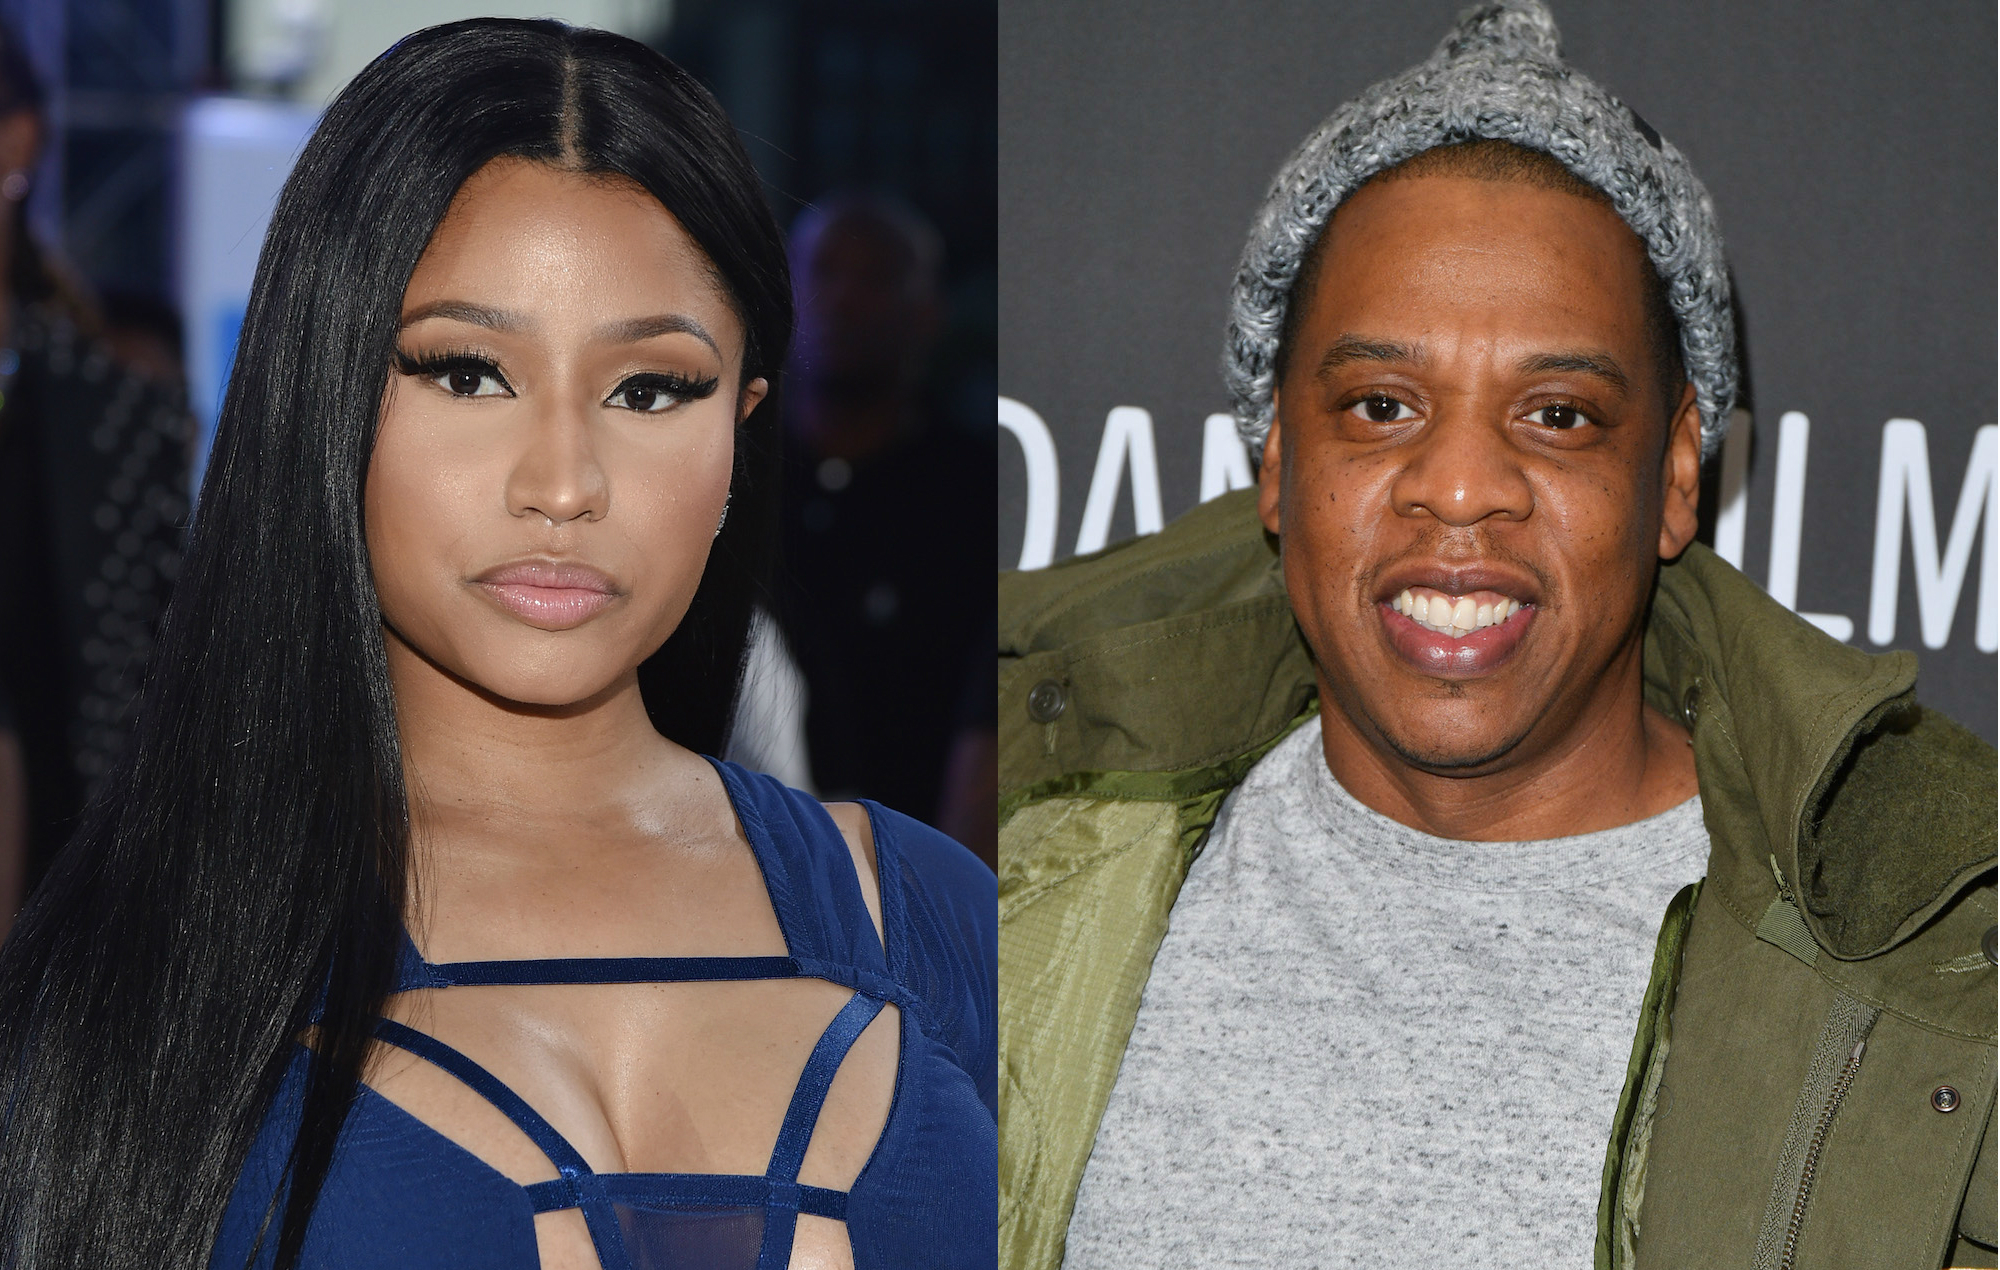 Jay-Z and Nicki Minaj ranked as the best male and female rappers of ALL TIME